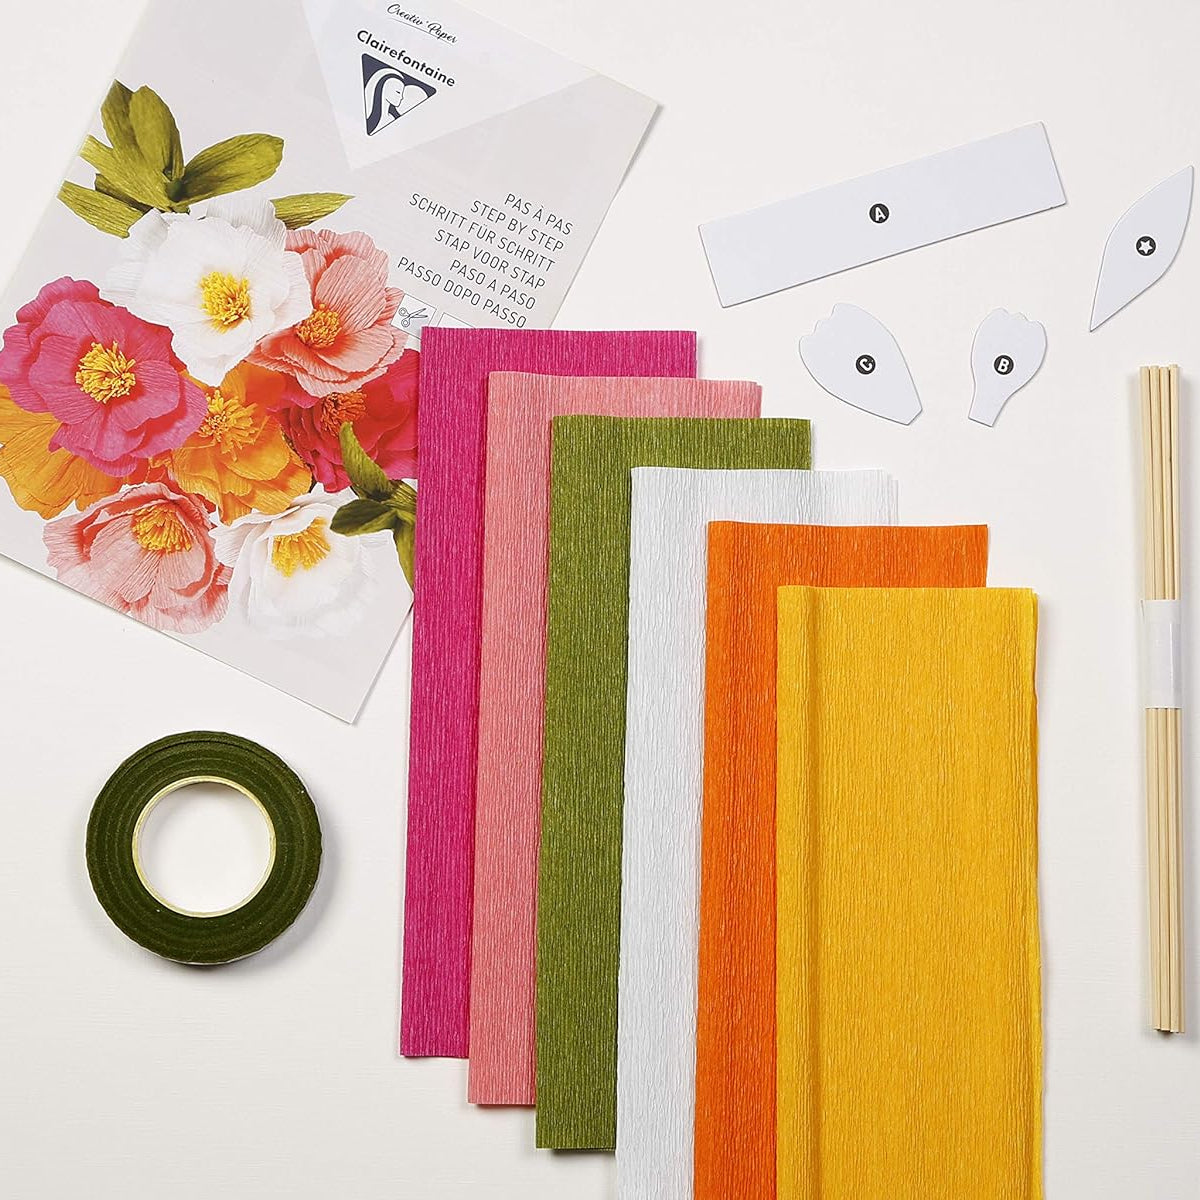 CLAIREFONTAINE Crepe Paper Kits-Bunch of Flowers 1216833